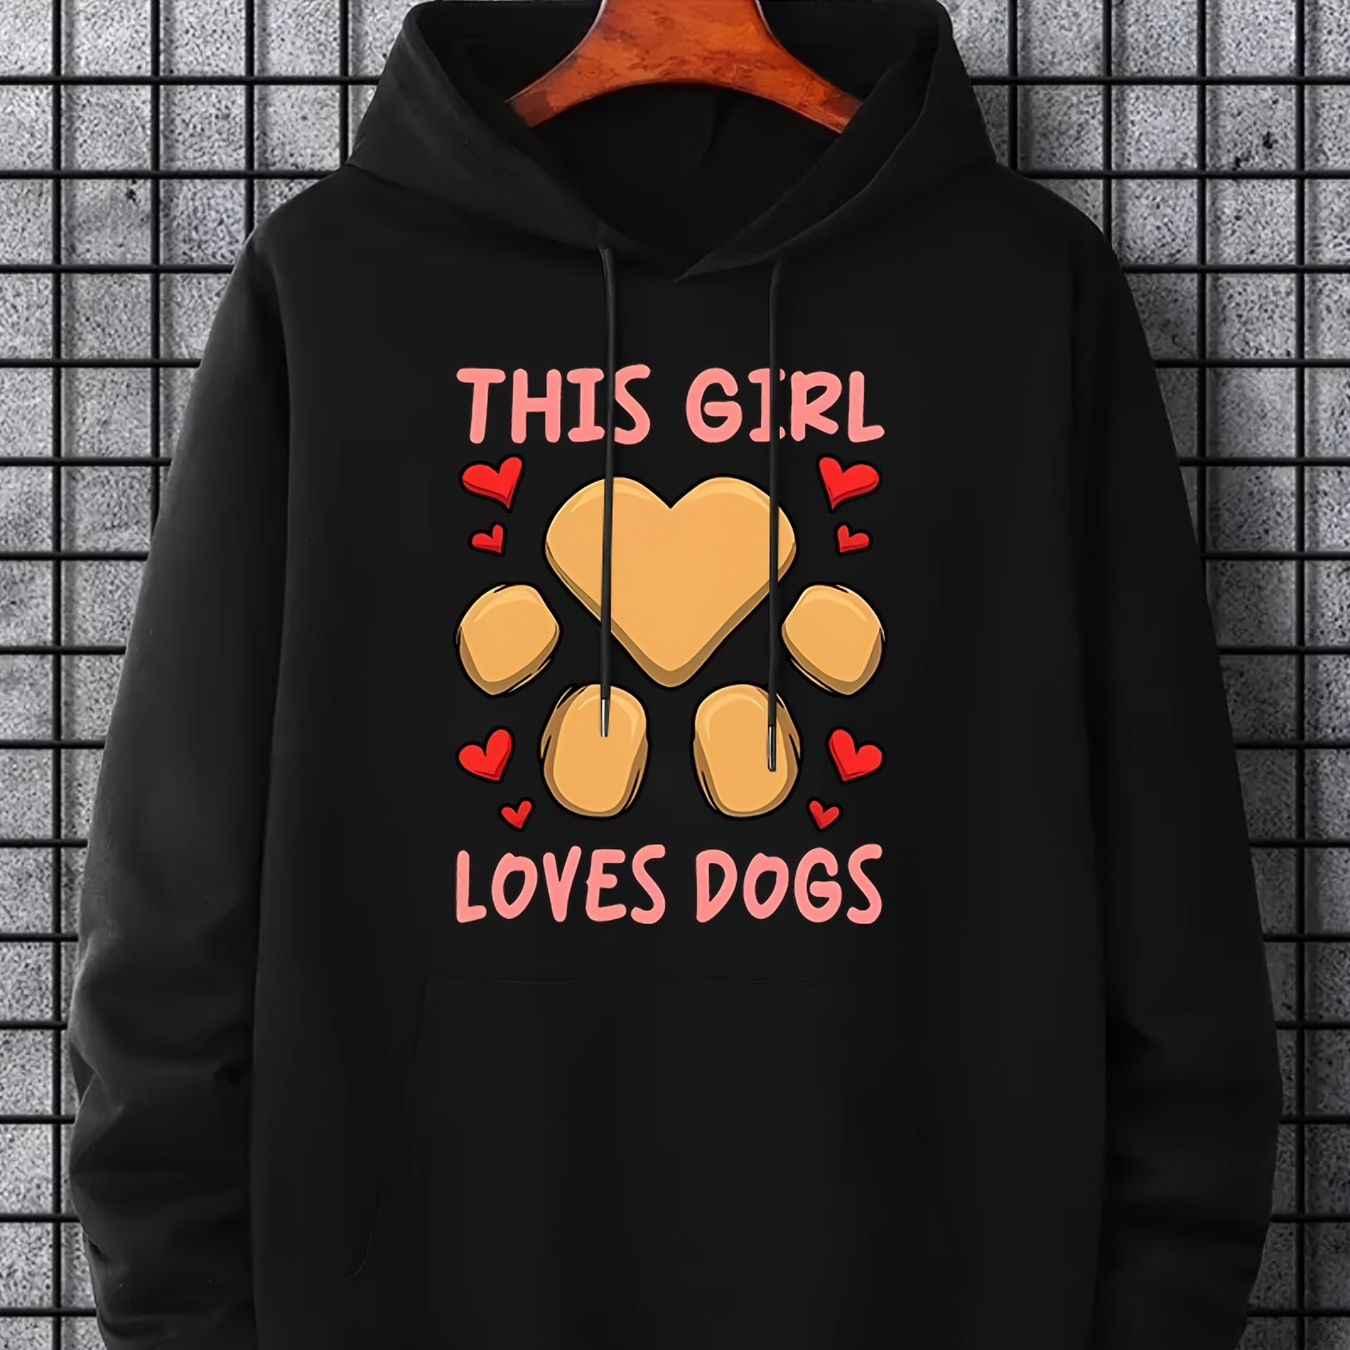 

Men's Casual "loves Dogs" Graphic Print Hoodies, Drawstring Comfortable Oversized Hooded Pullover Sweatshirt Plus Size